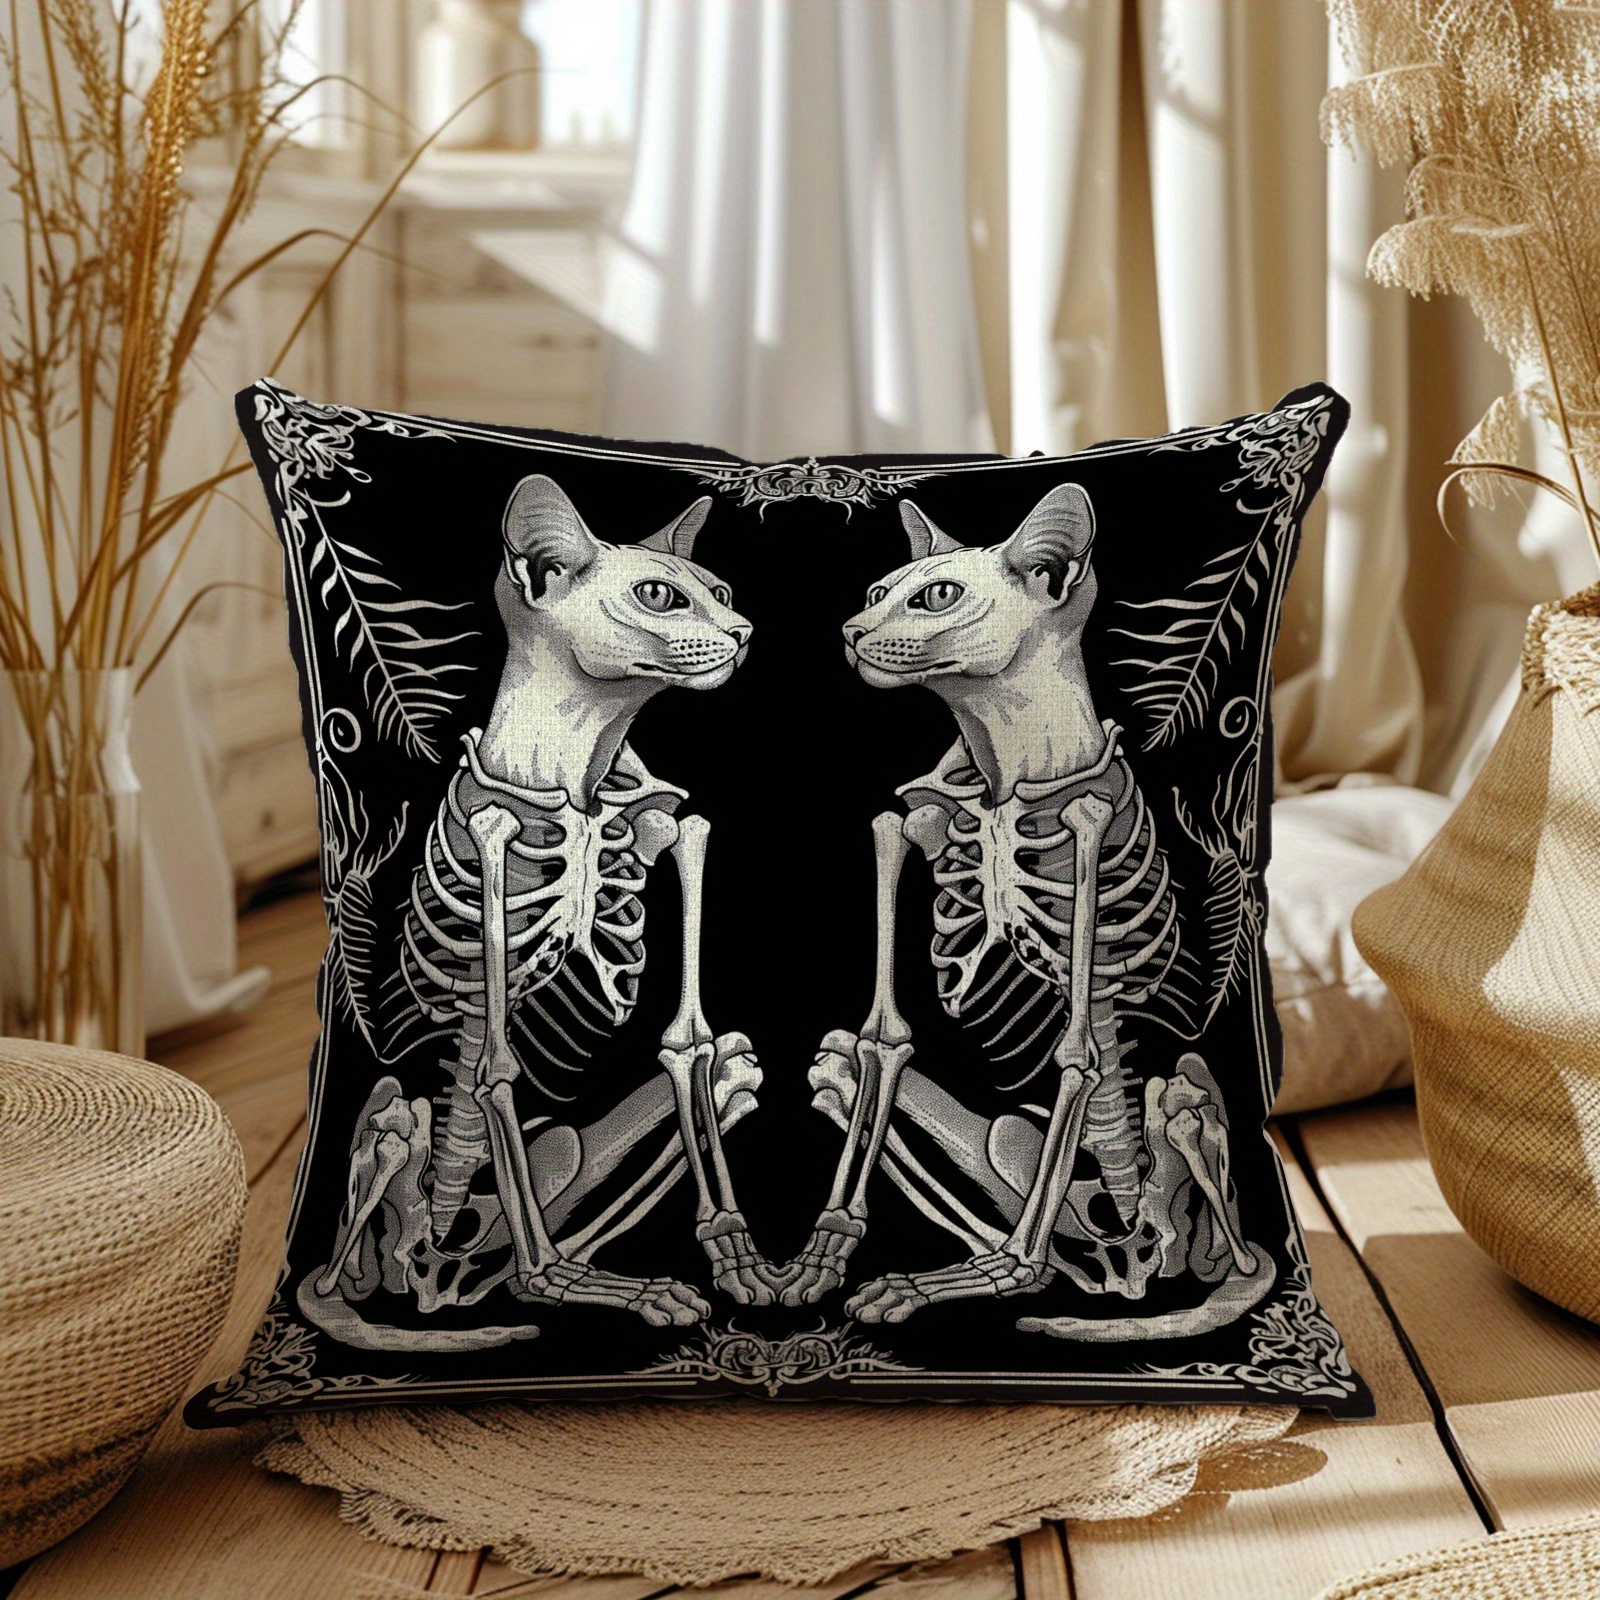 

Skeleton Cats Decorative Pillow Cover - 45cm/18in, Single-sided Print, No Insert, Suitable For Sofa, Bed, Car, Home, Bedroom, Living Room - Contemporary Style, Polyester Fabric, Woven